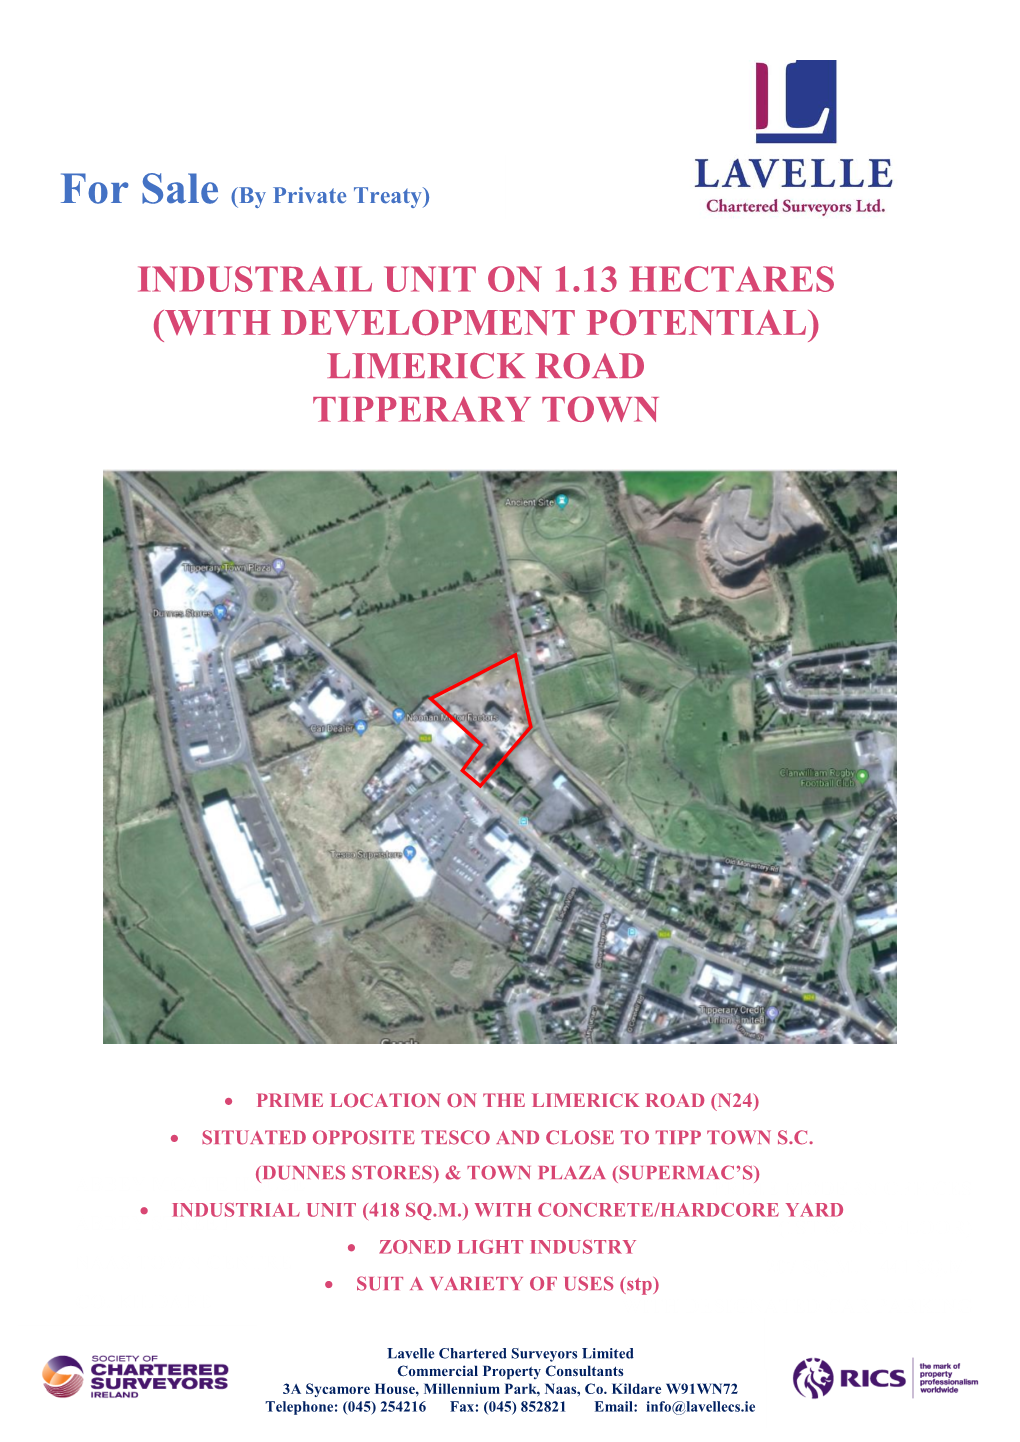 (With Development Potential) Limerick Road Tipperary Town